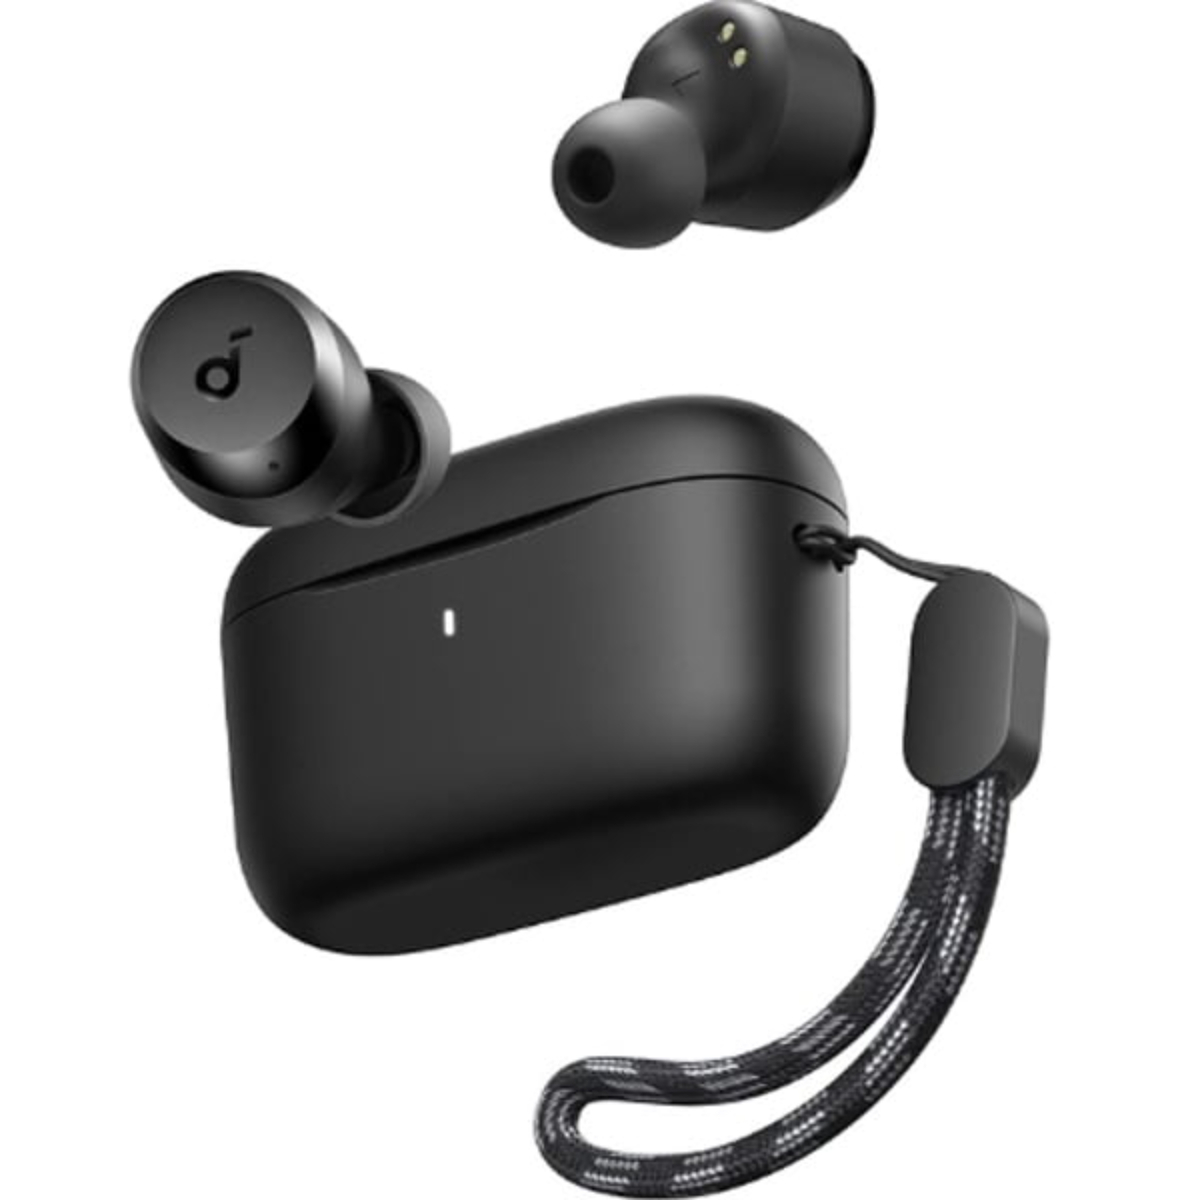 Anker Soundcore A20i A3948H11 True Wireless Earbuds Black Online at Best  Price, Mobile Hands Free